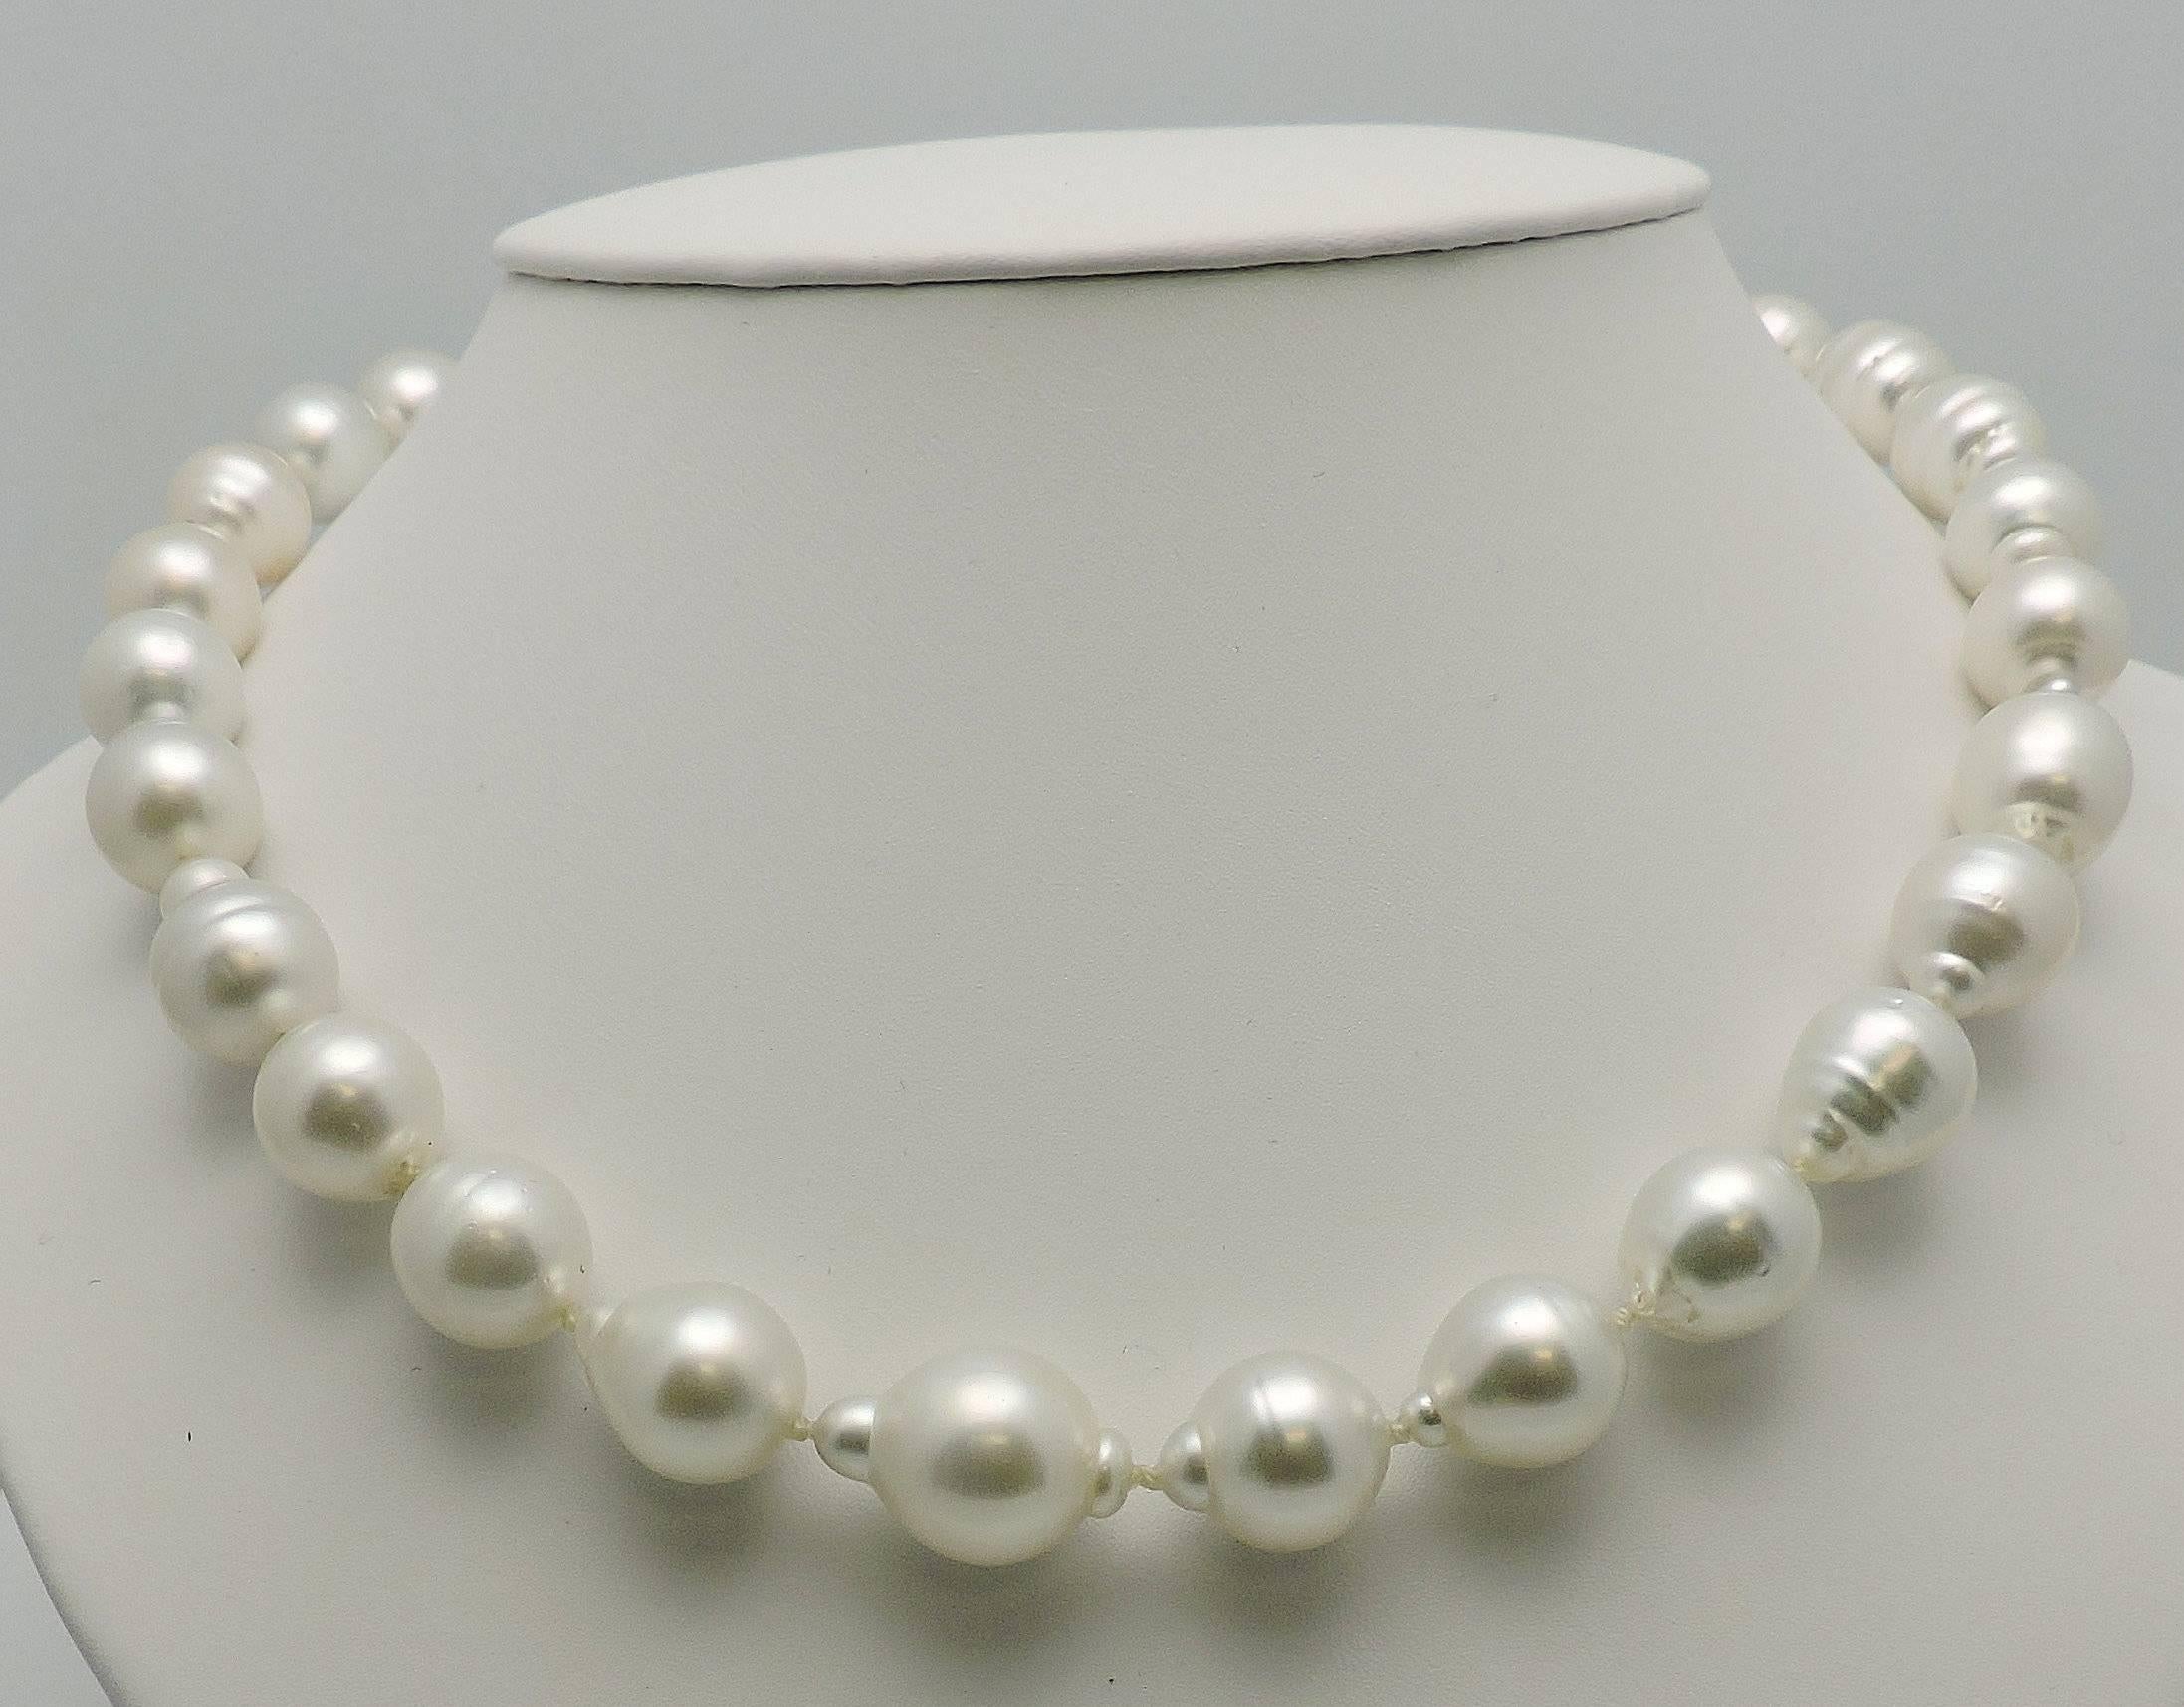 Brilliant silvery white luster, very bright. That color everyone wants.    Measure 12.6 x 16 mm. 
27 Pearls.
18K wg clasp set with 0.35 ct. tw in round diamonds SI, H.
Measurement with clasp 20 inches. 
Clasp measures 2 inches.  Simple foldover